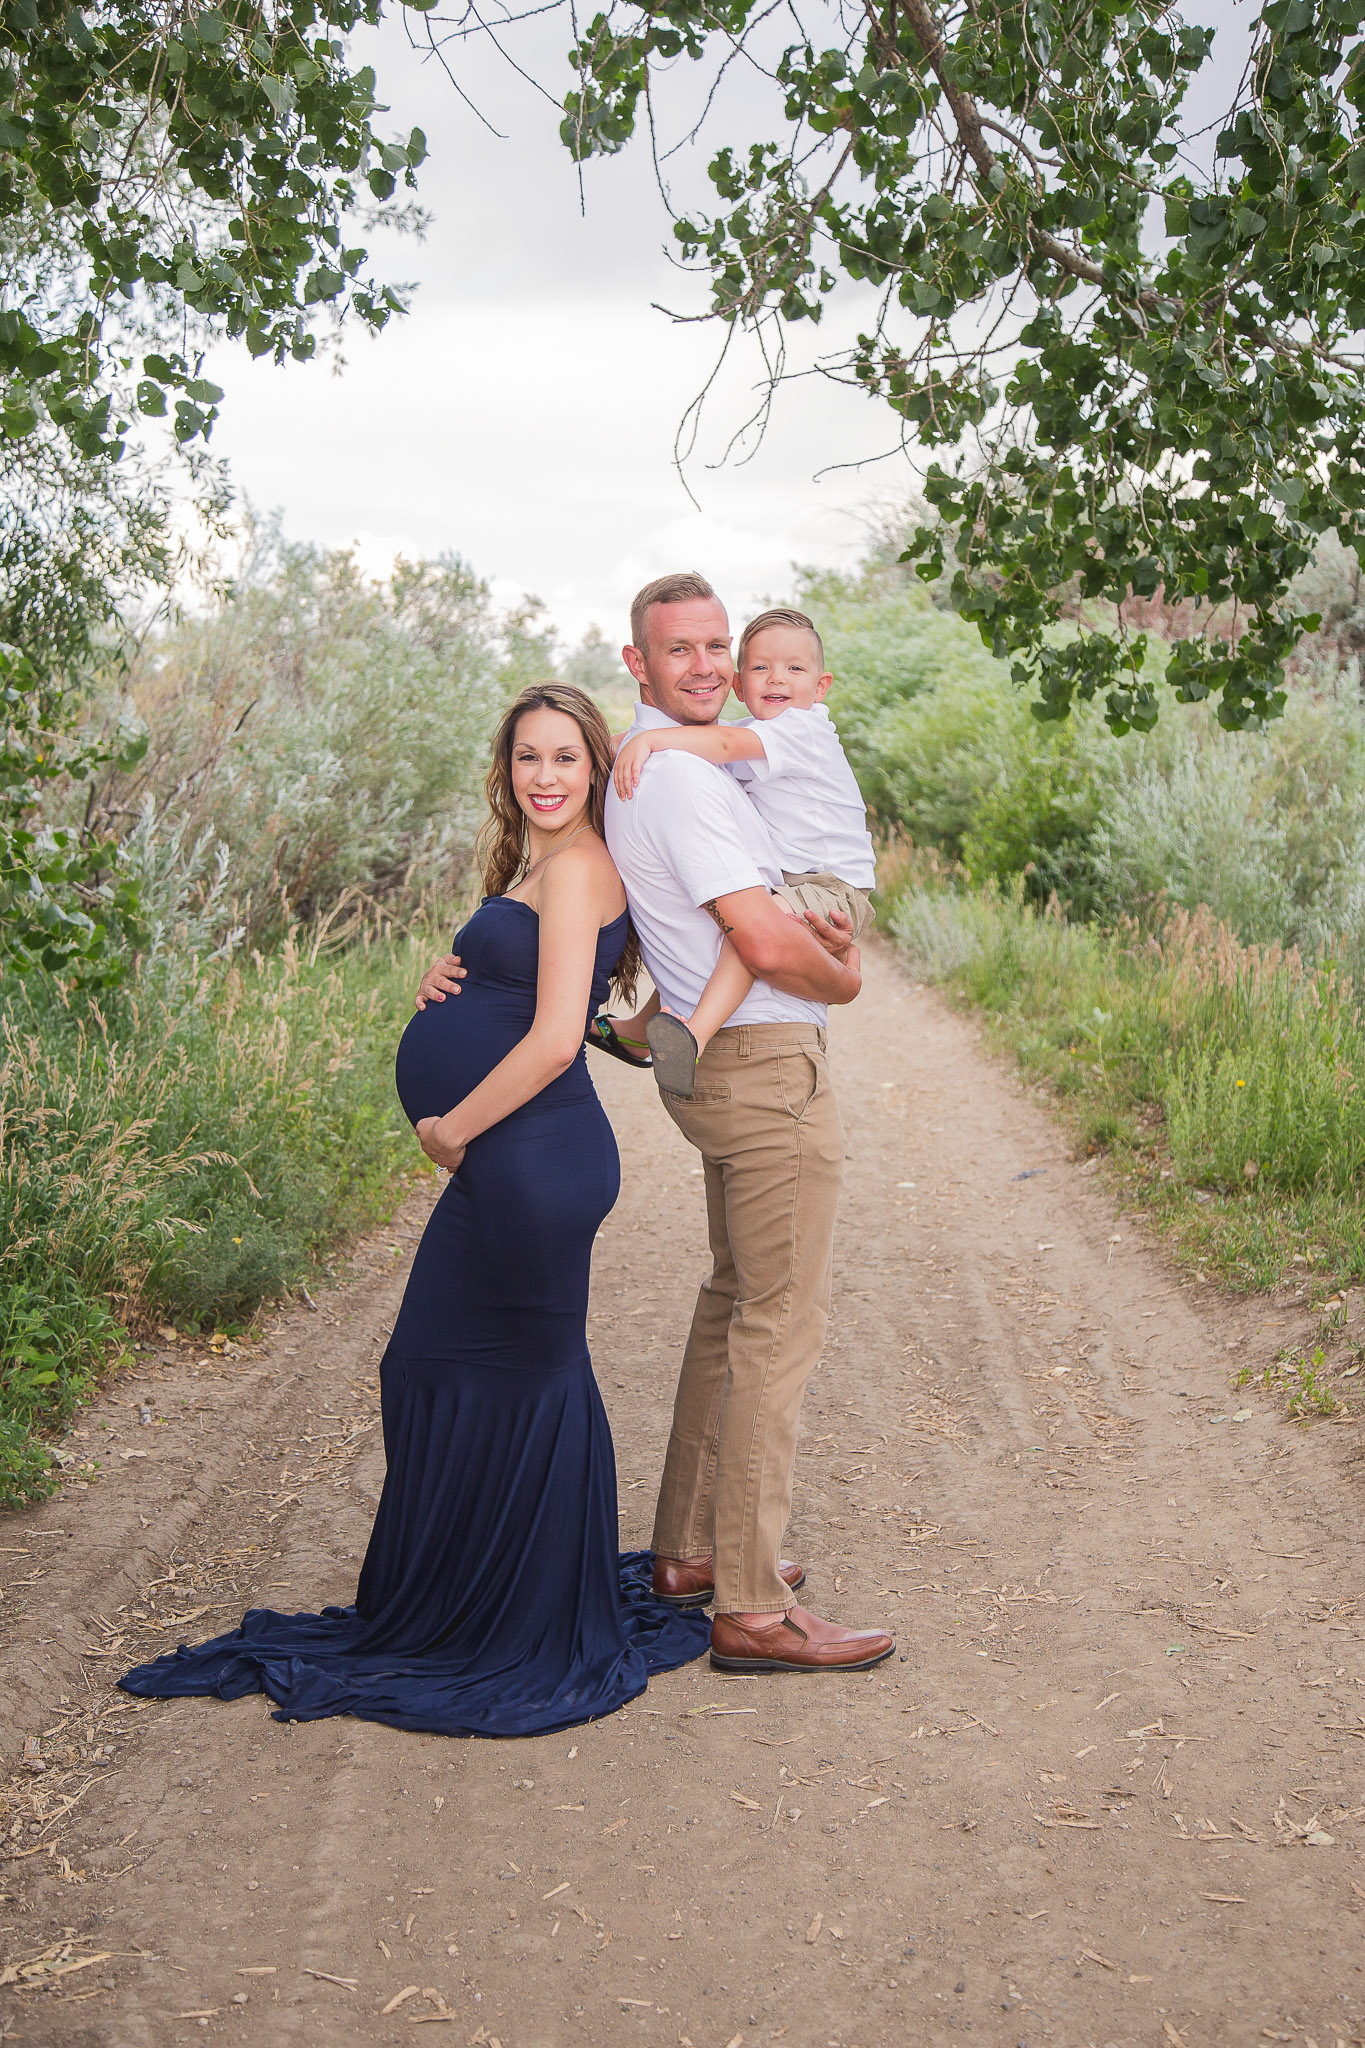 Maternity-Family-with-Toddler-Outside-Gown.jpg